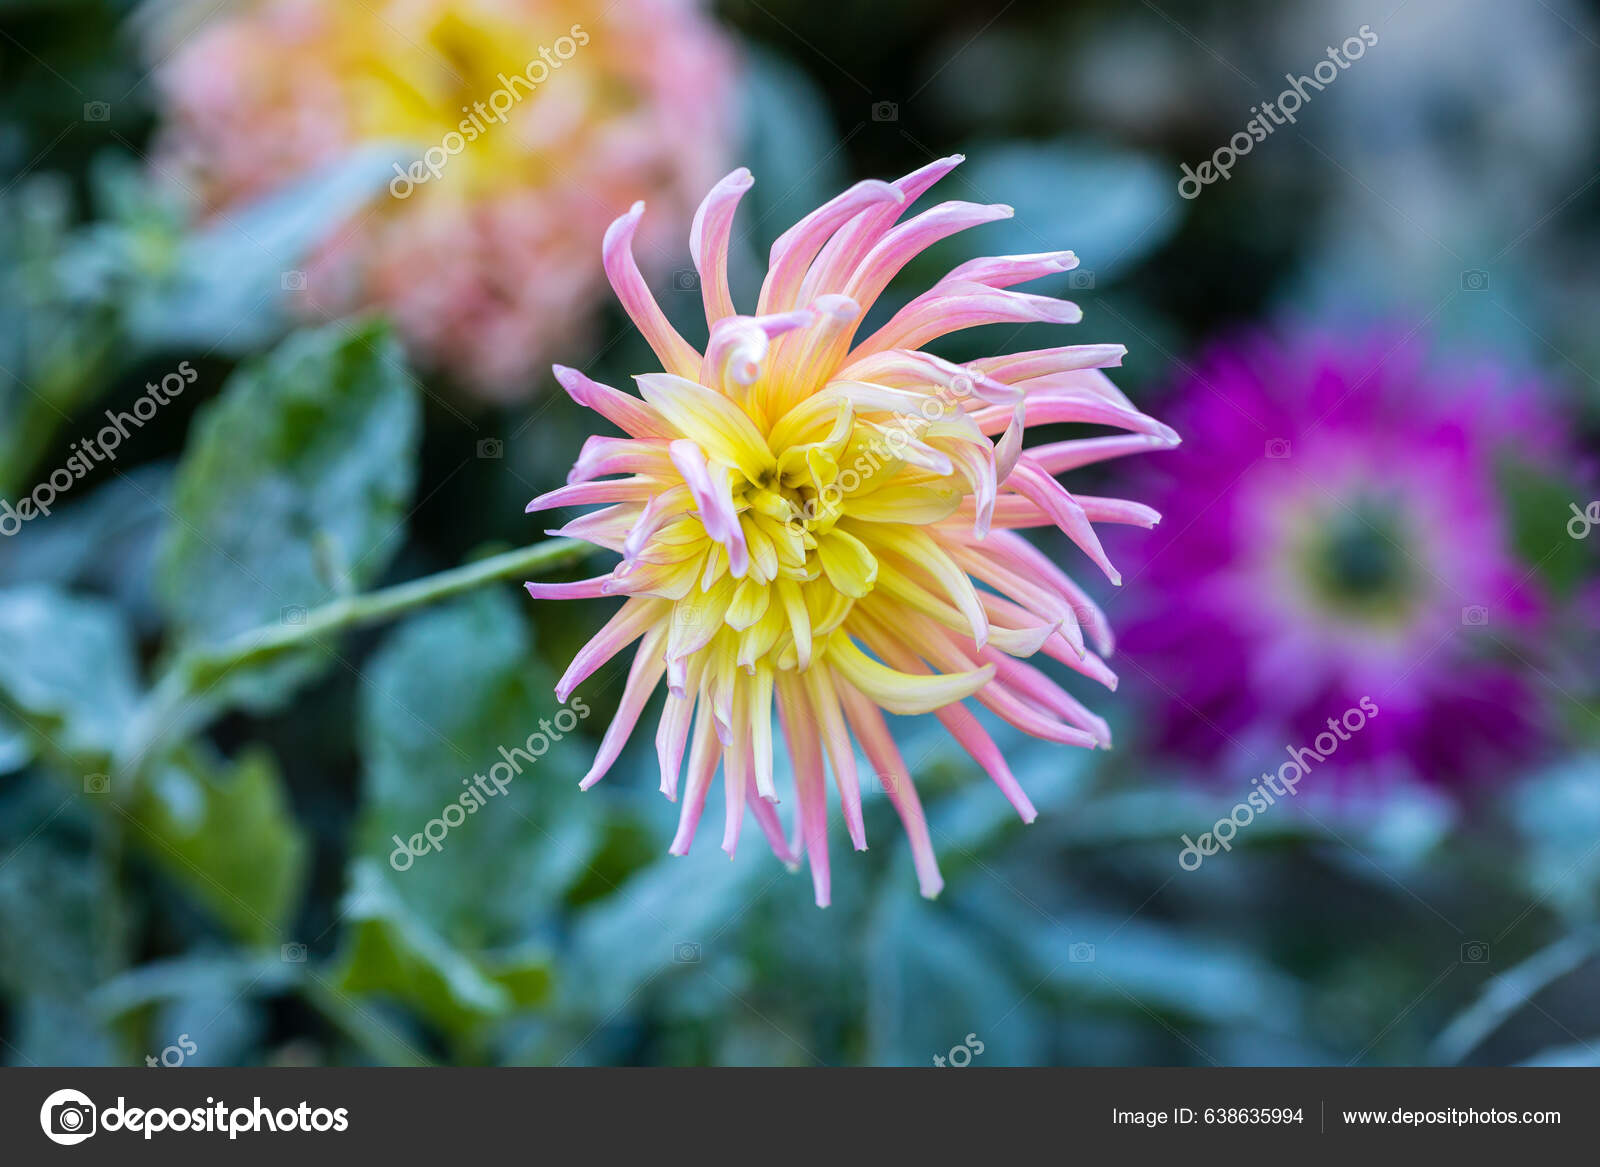 Dahlia Alfred Grille Dahlia Flowers Cultivated Garden Stock Photo by  ©jslsvega 638635994